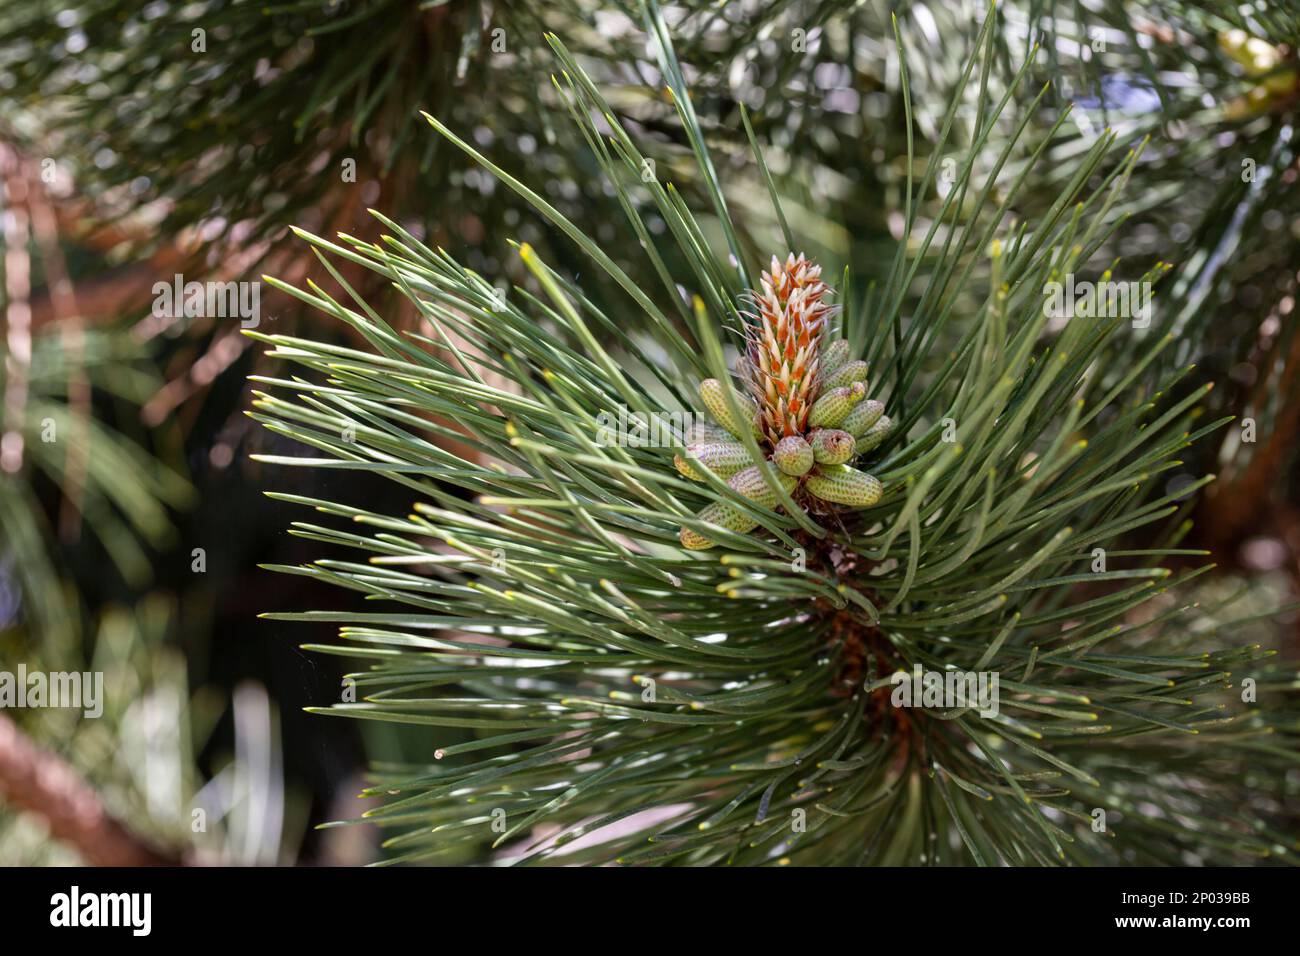 Pine branch young cones macro. Young green sprouts pine tree needles. Fresh grow mountain pine twig sprouts, fir branch in spring forest. Pinus mugo b Stock Photo